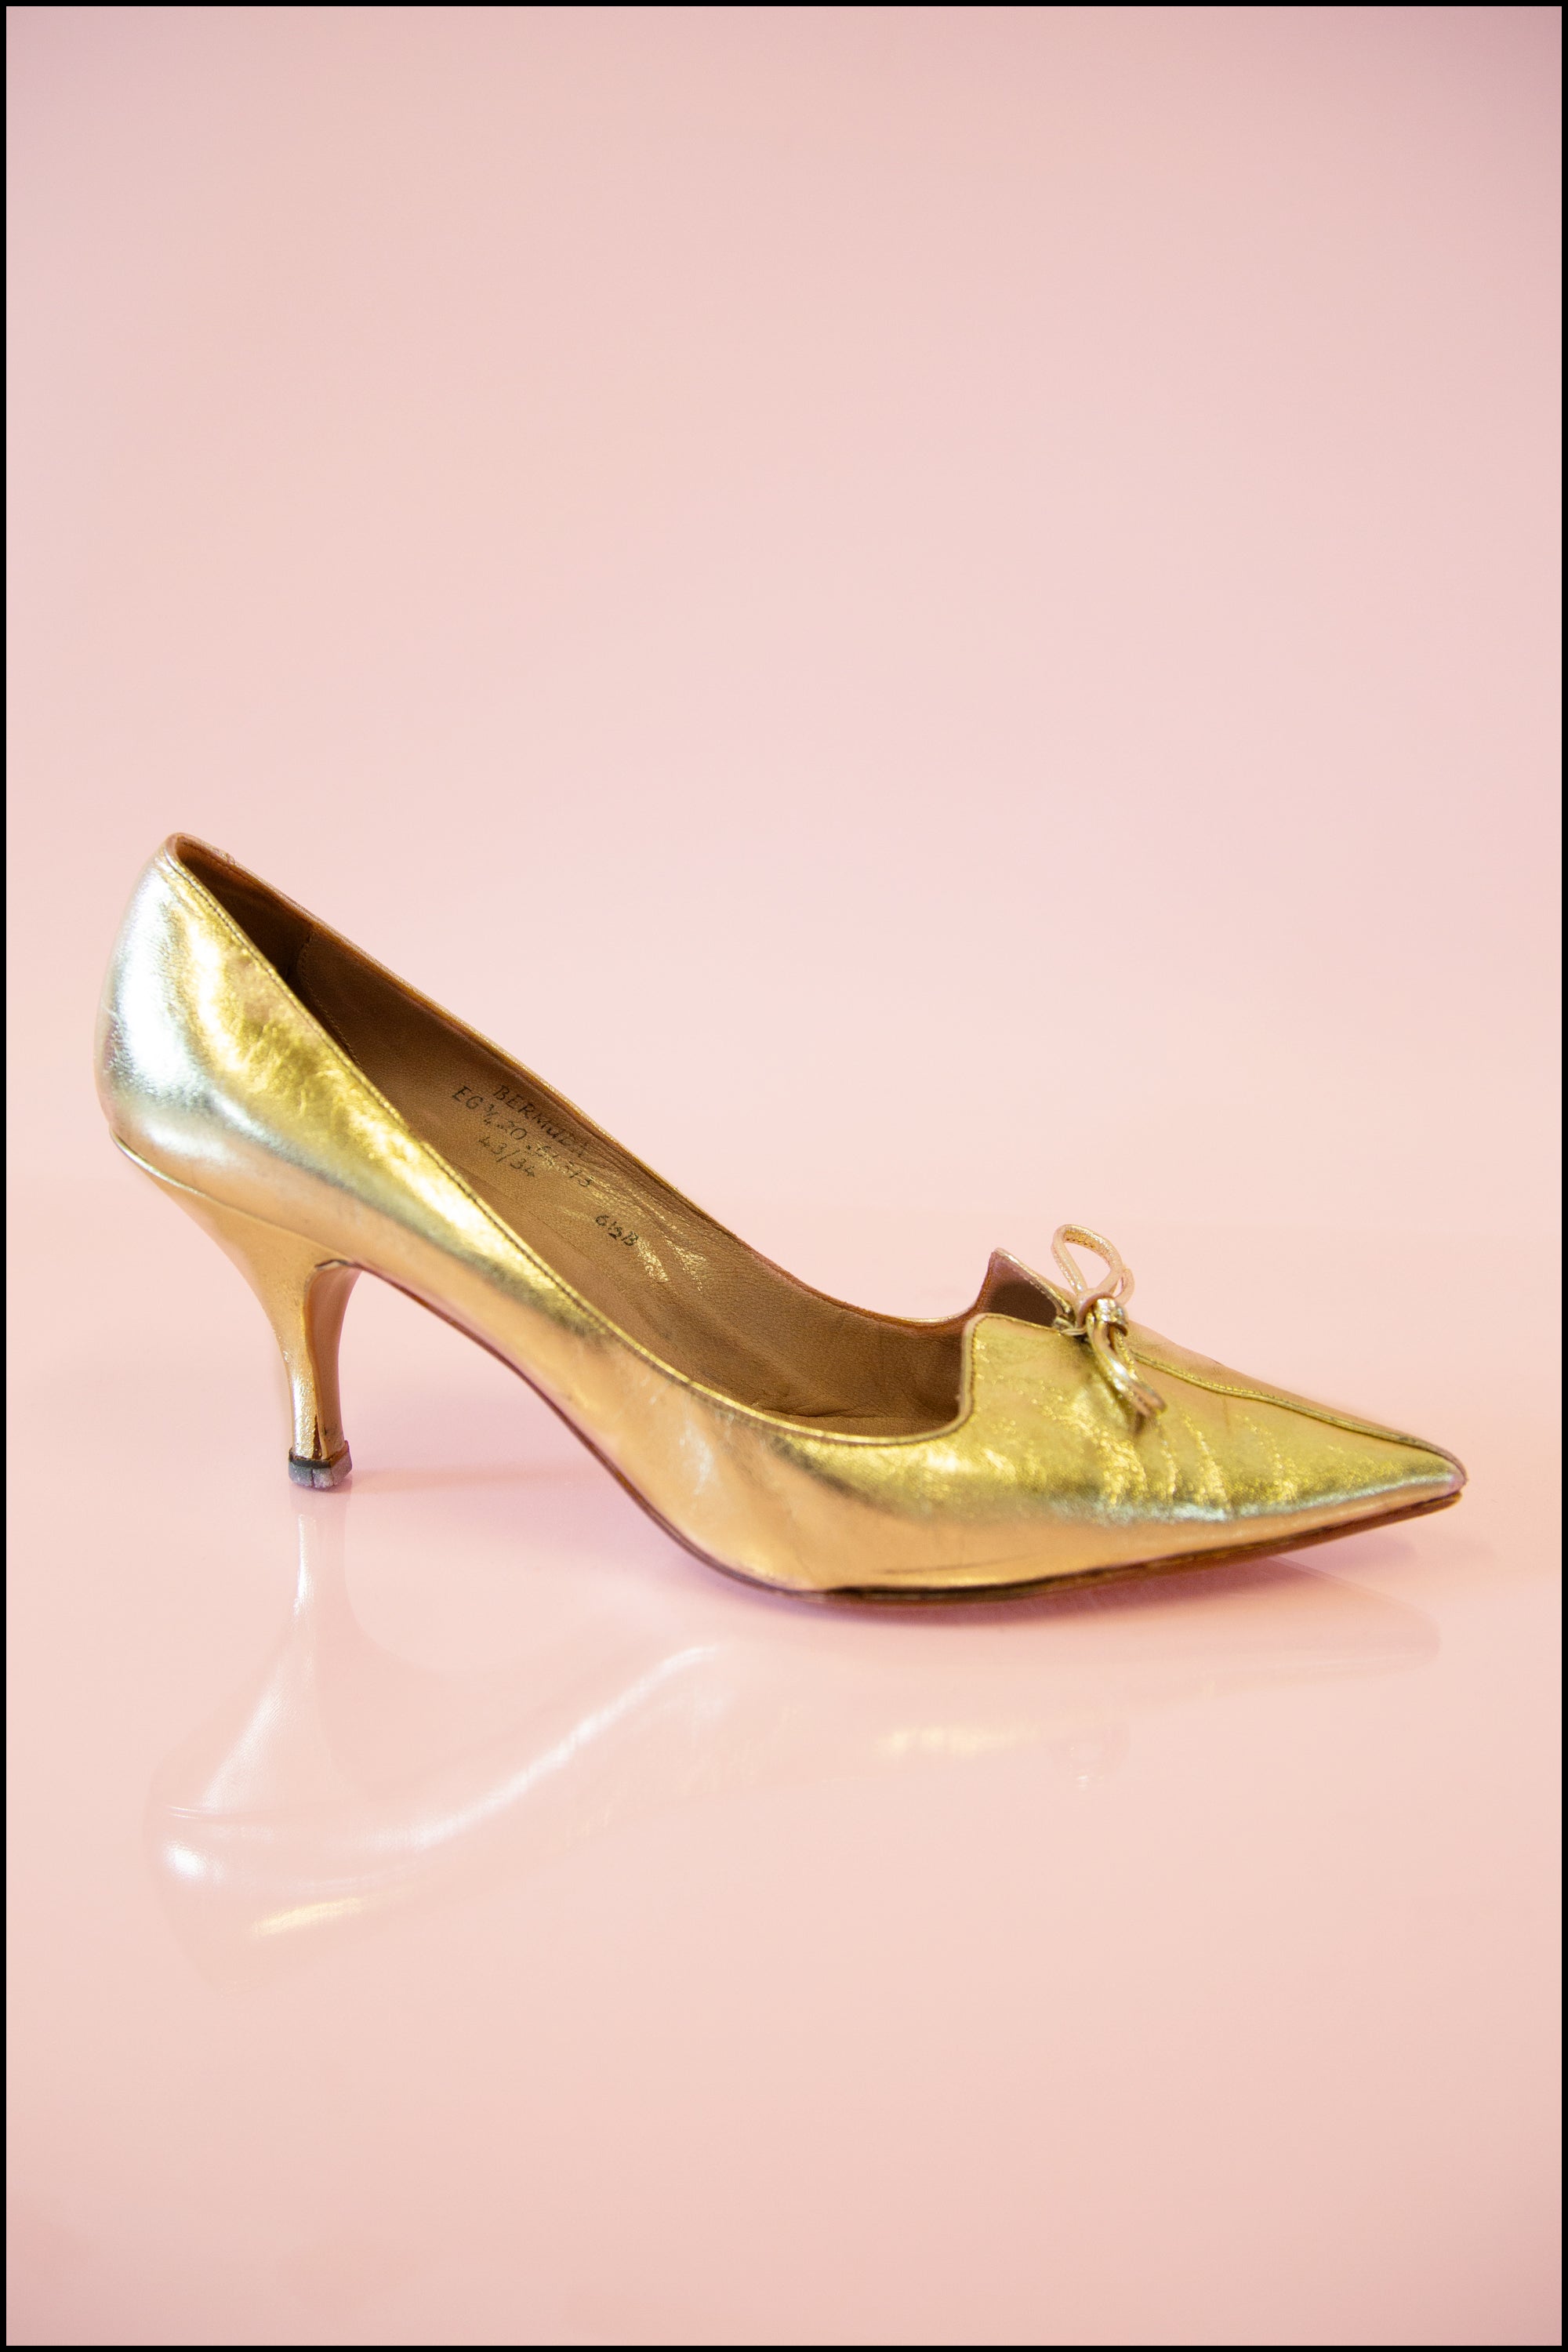 vintage 1950s gold metallic leather pointed evening shoes Alexandra King Vintage